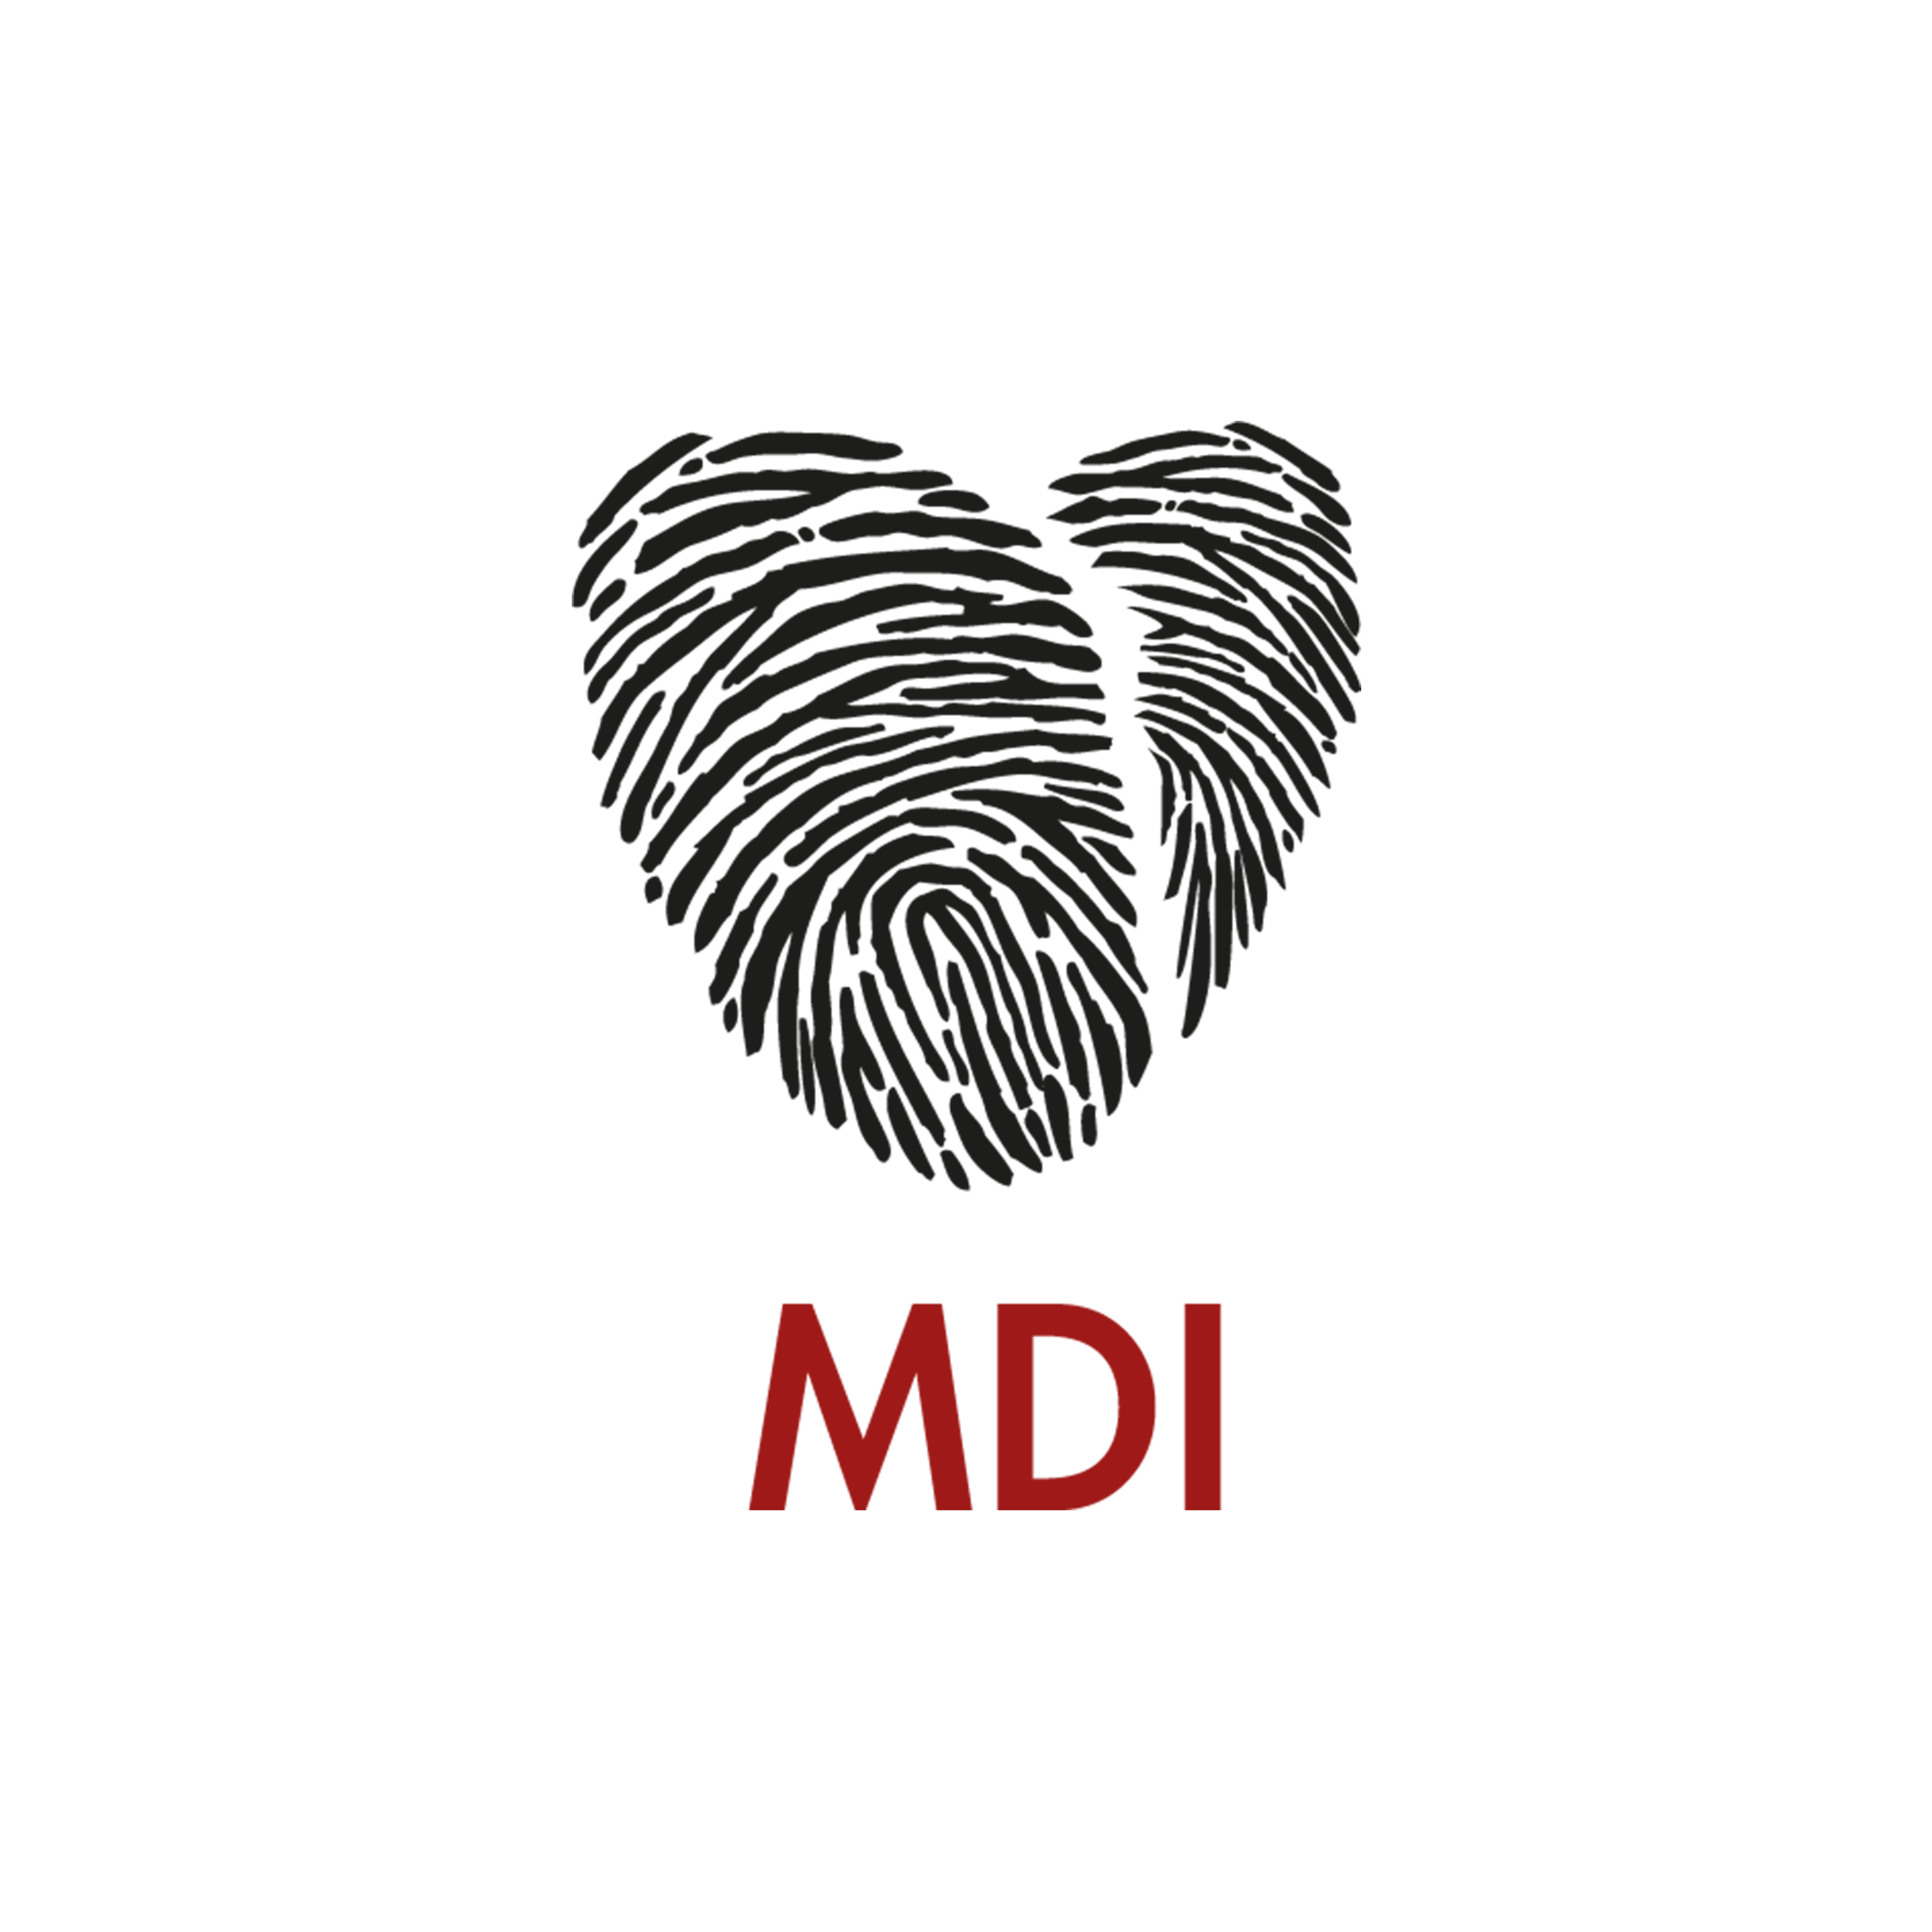 MDI logo in black and red